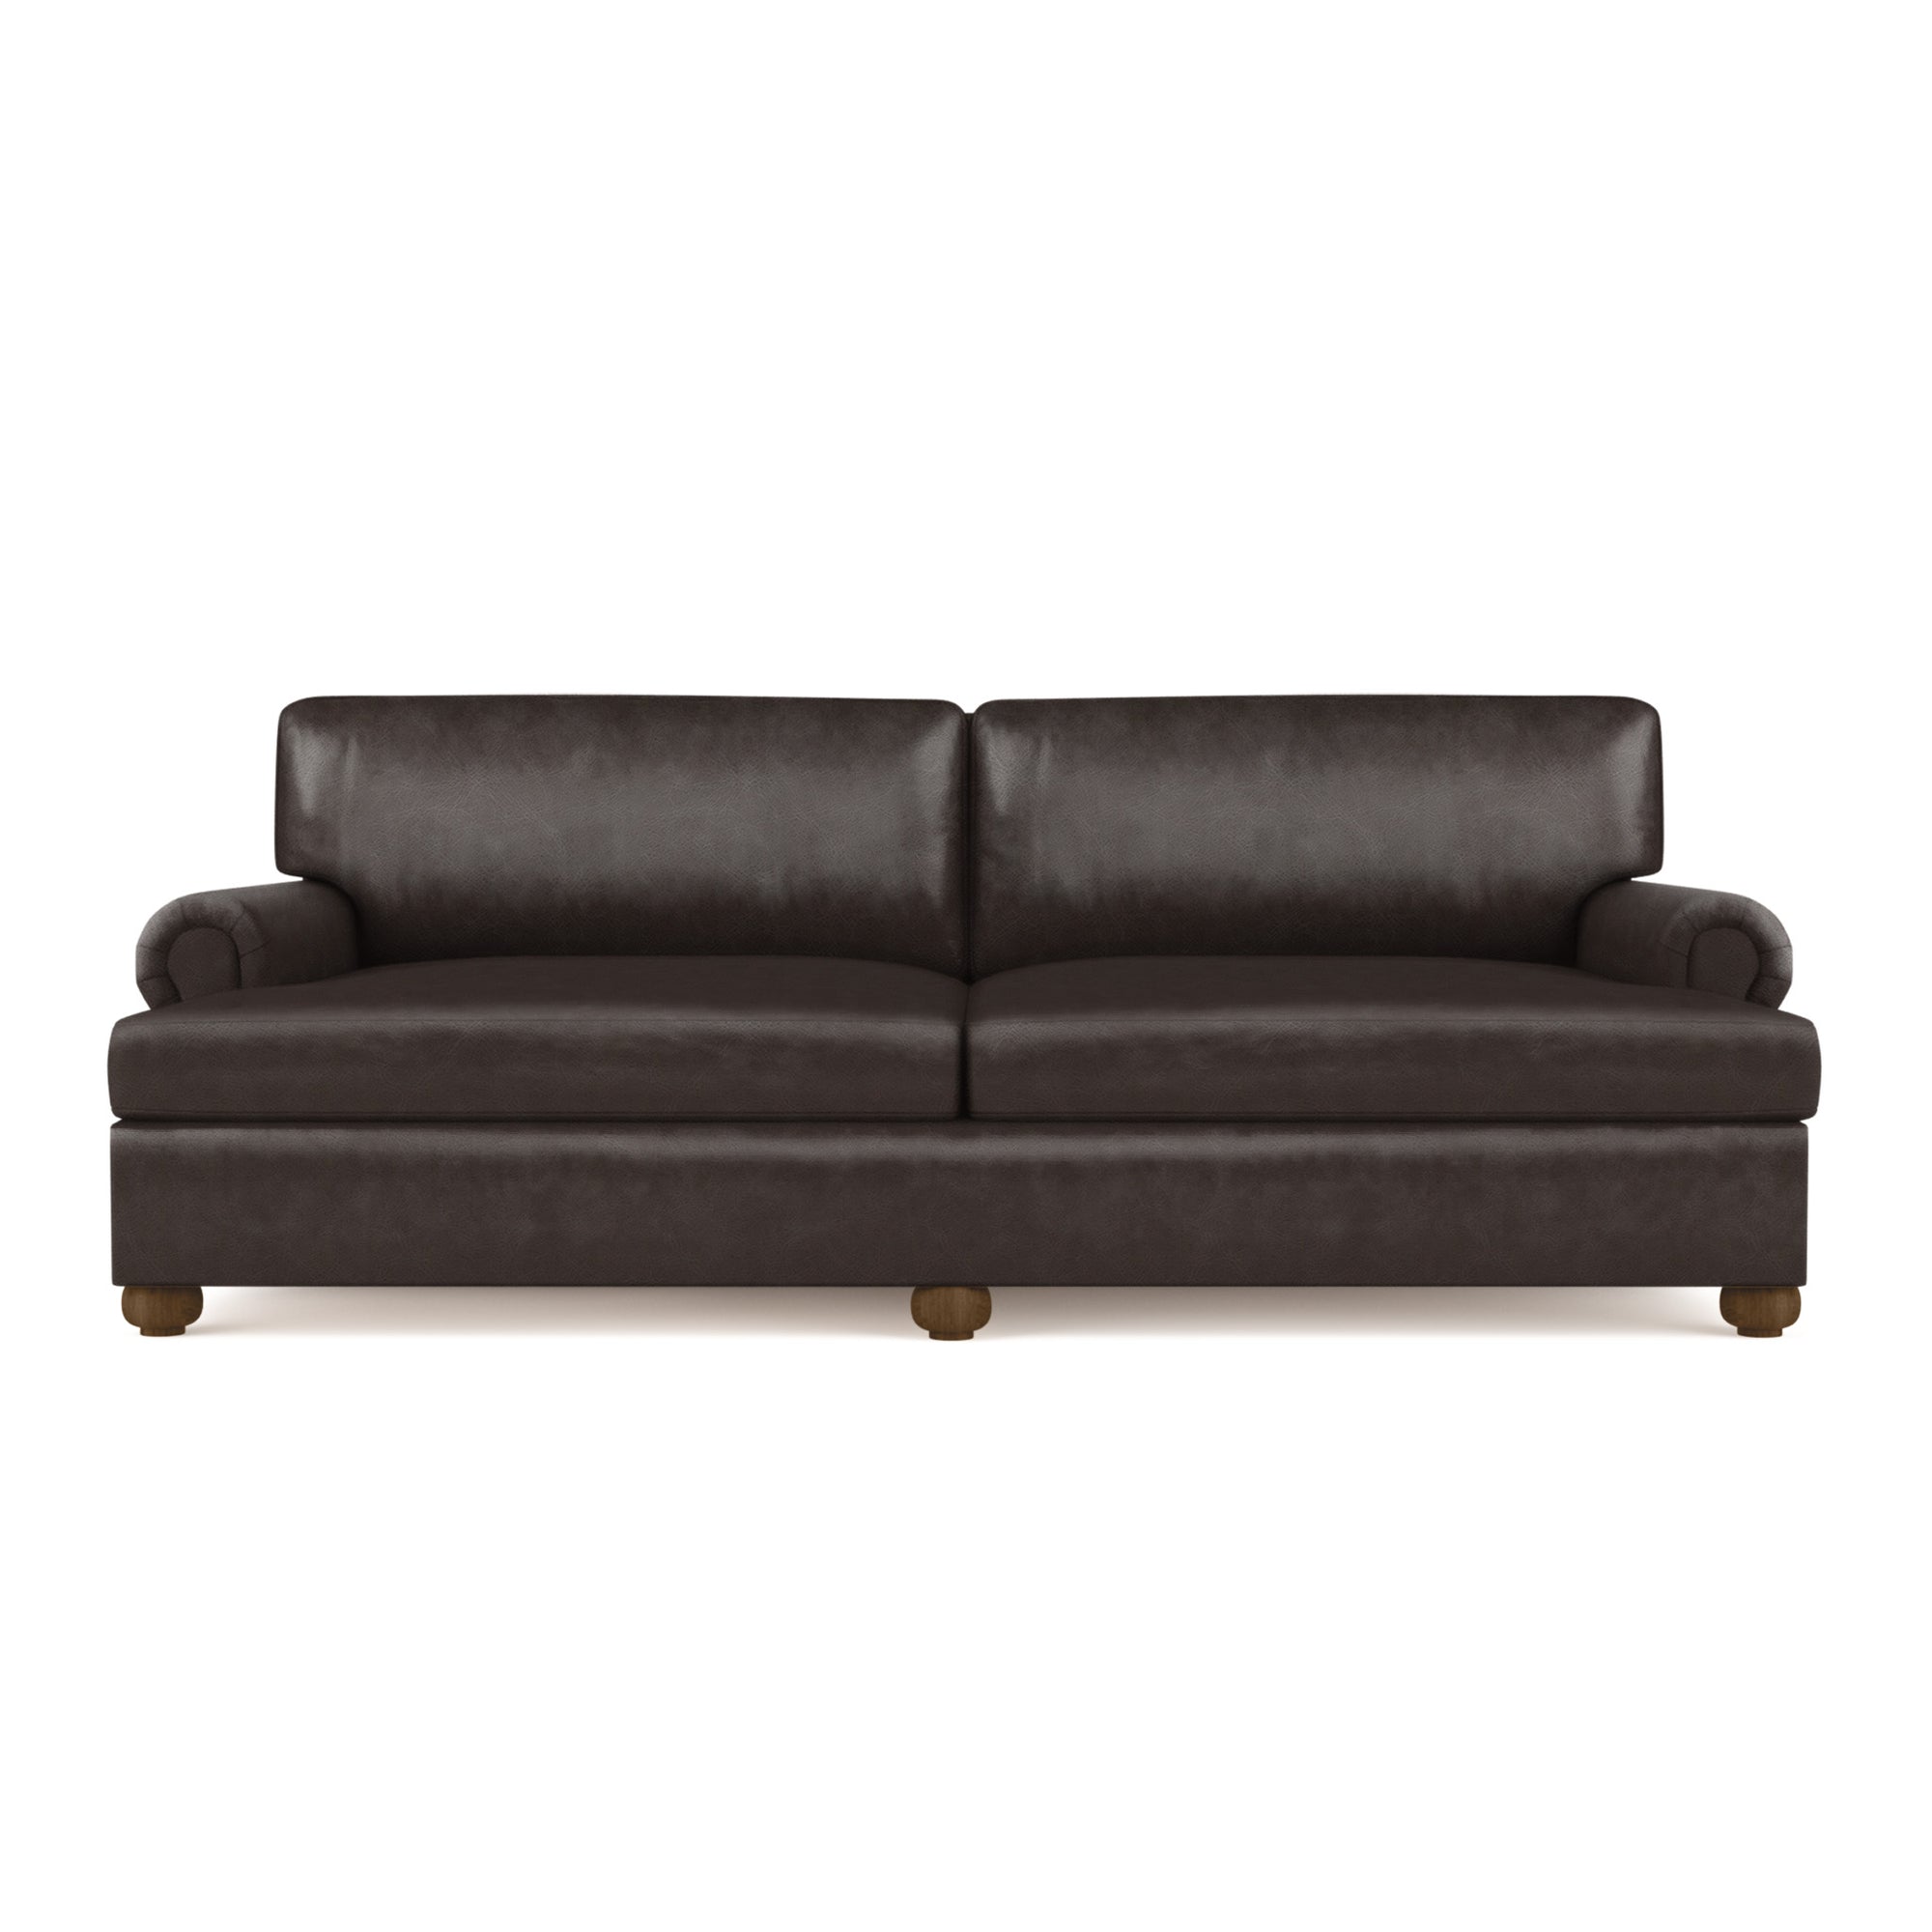 Leroy Daybed - Chocolate Vintage Leather